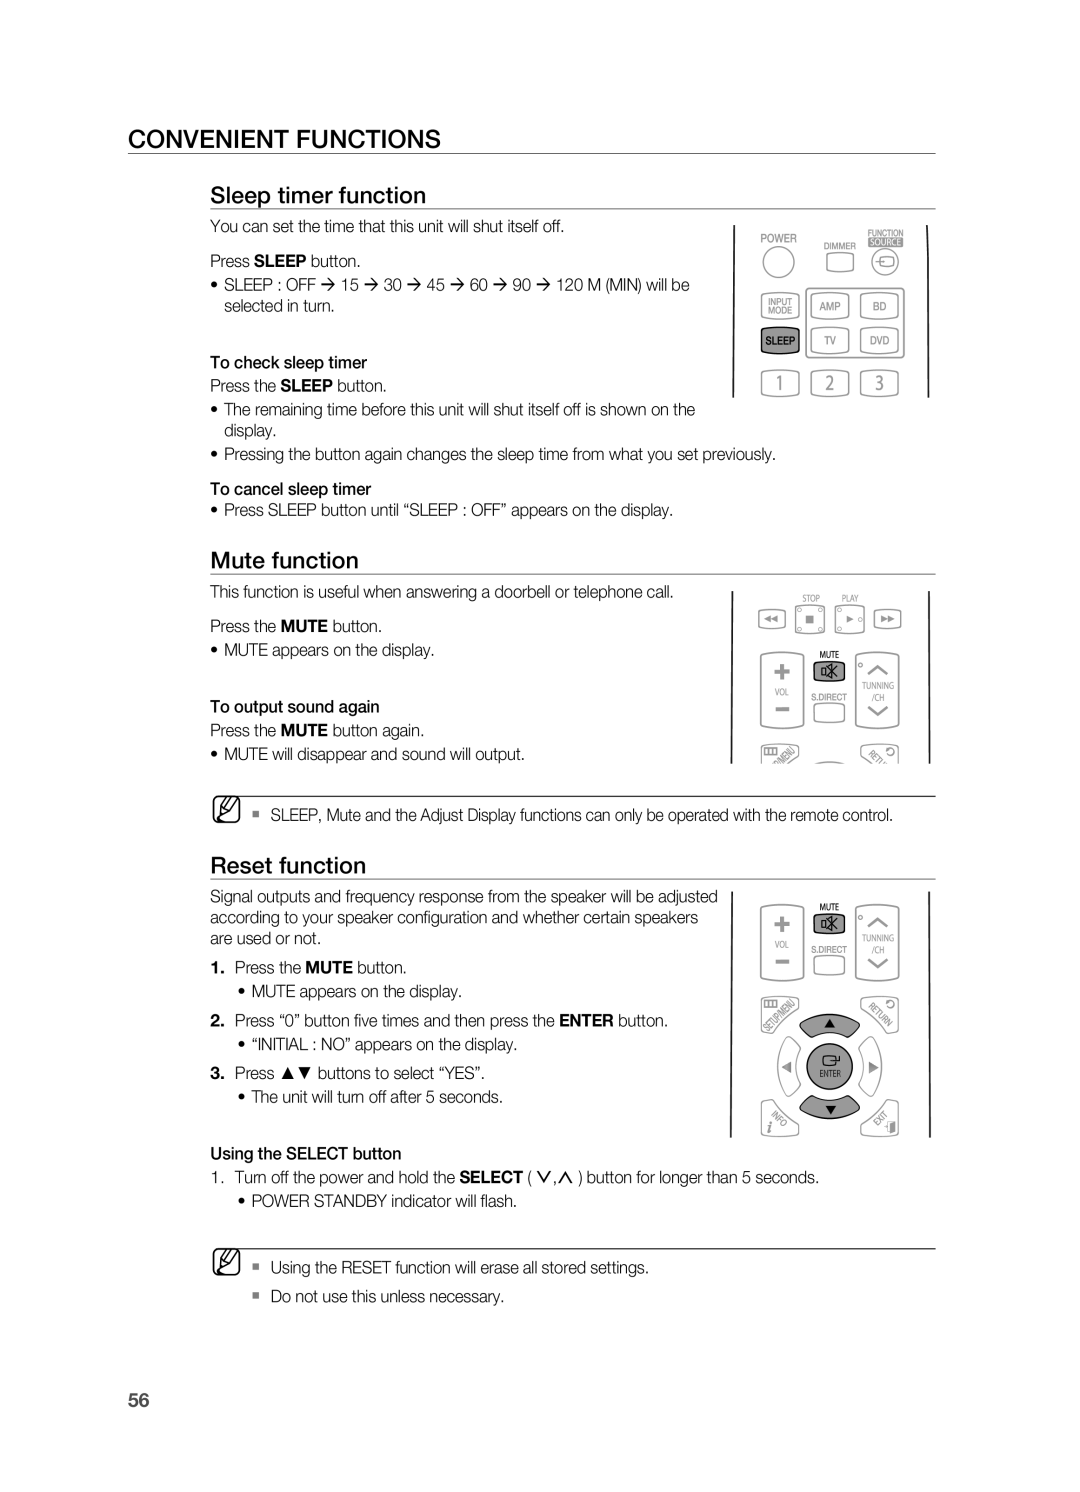 Samsung HT-AS730S user manual Convenient functions, Sleep timer function, Mute function, Reset function 